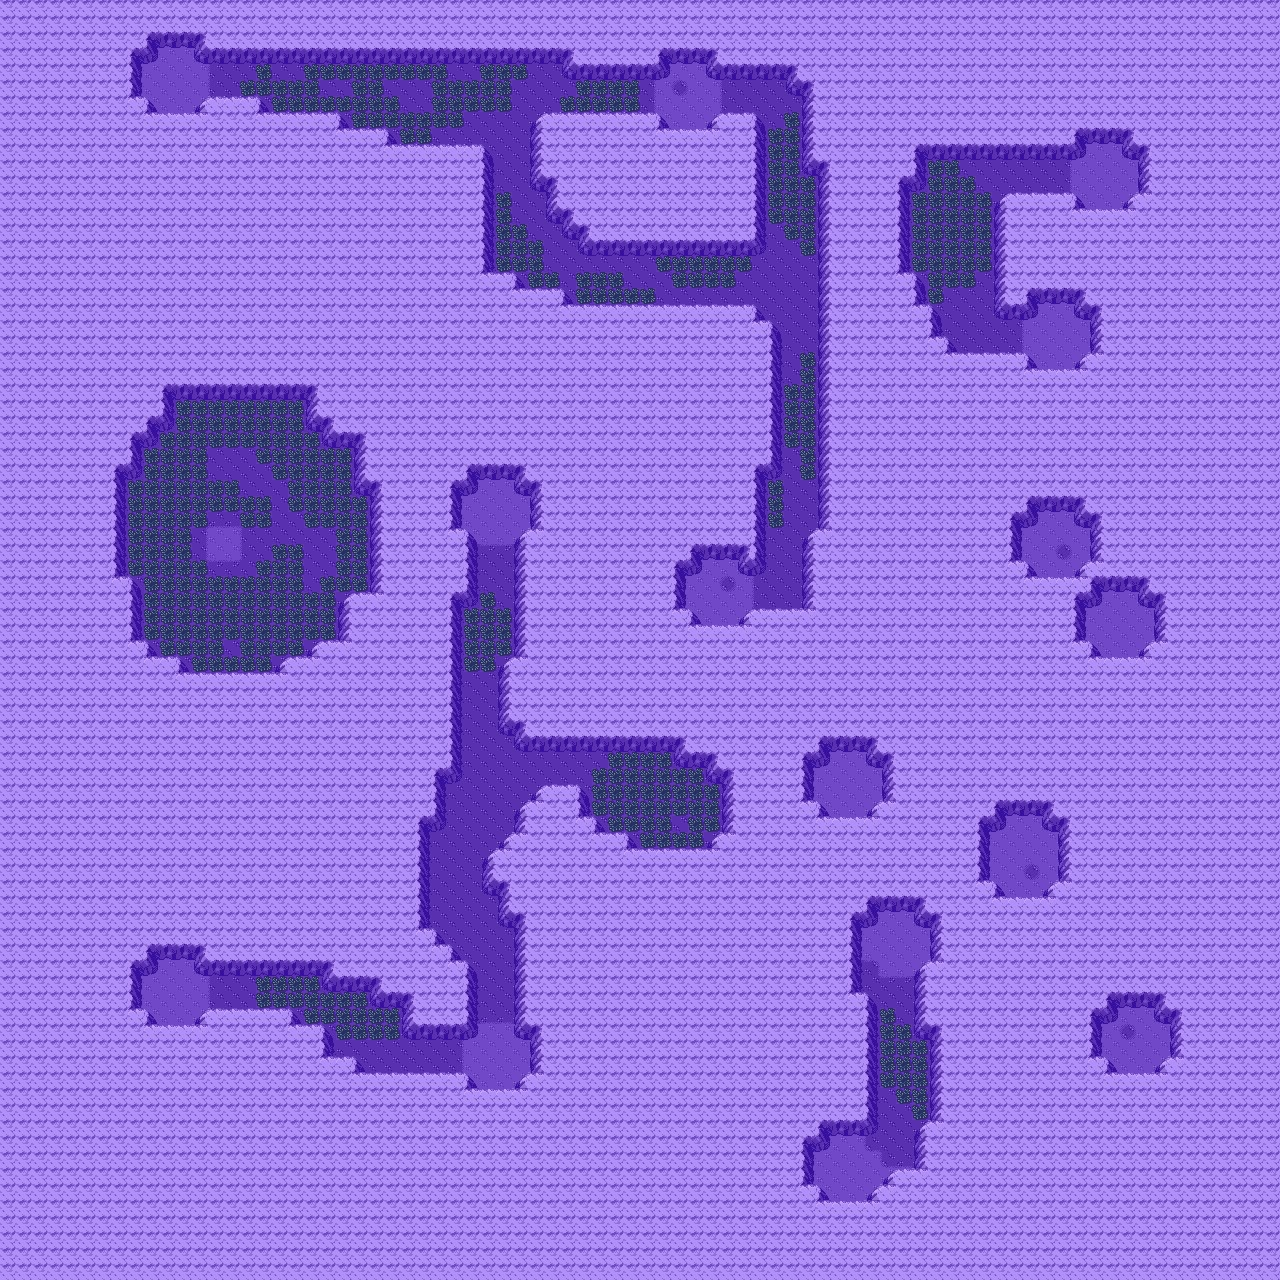 A purple and blue pattern

Description automatically generated